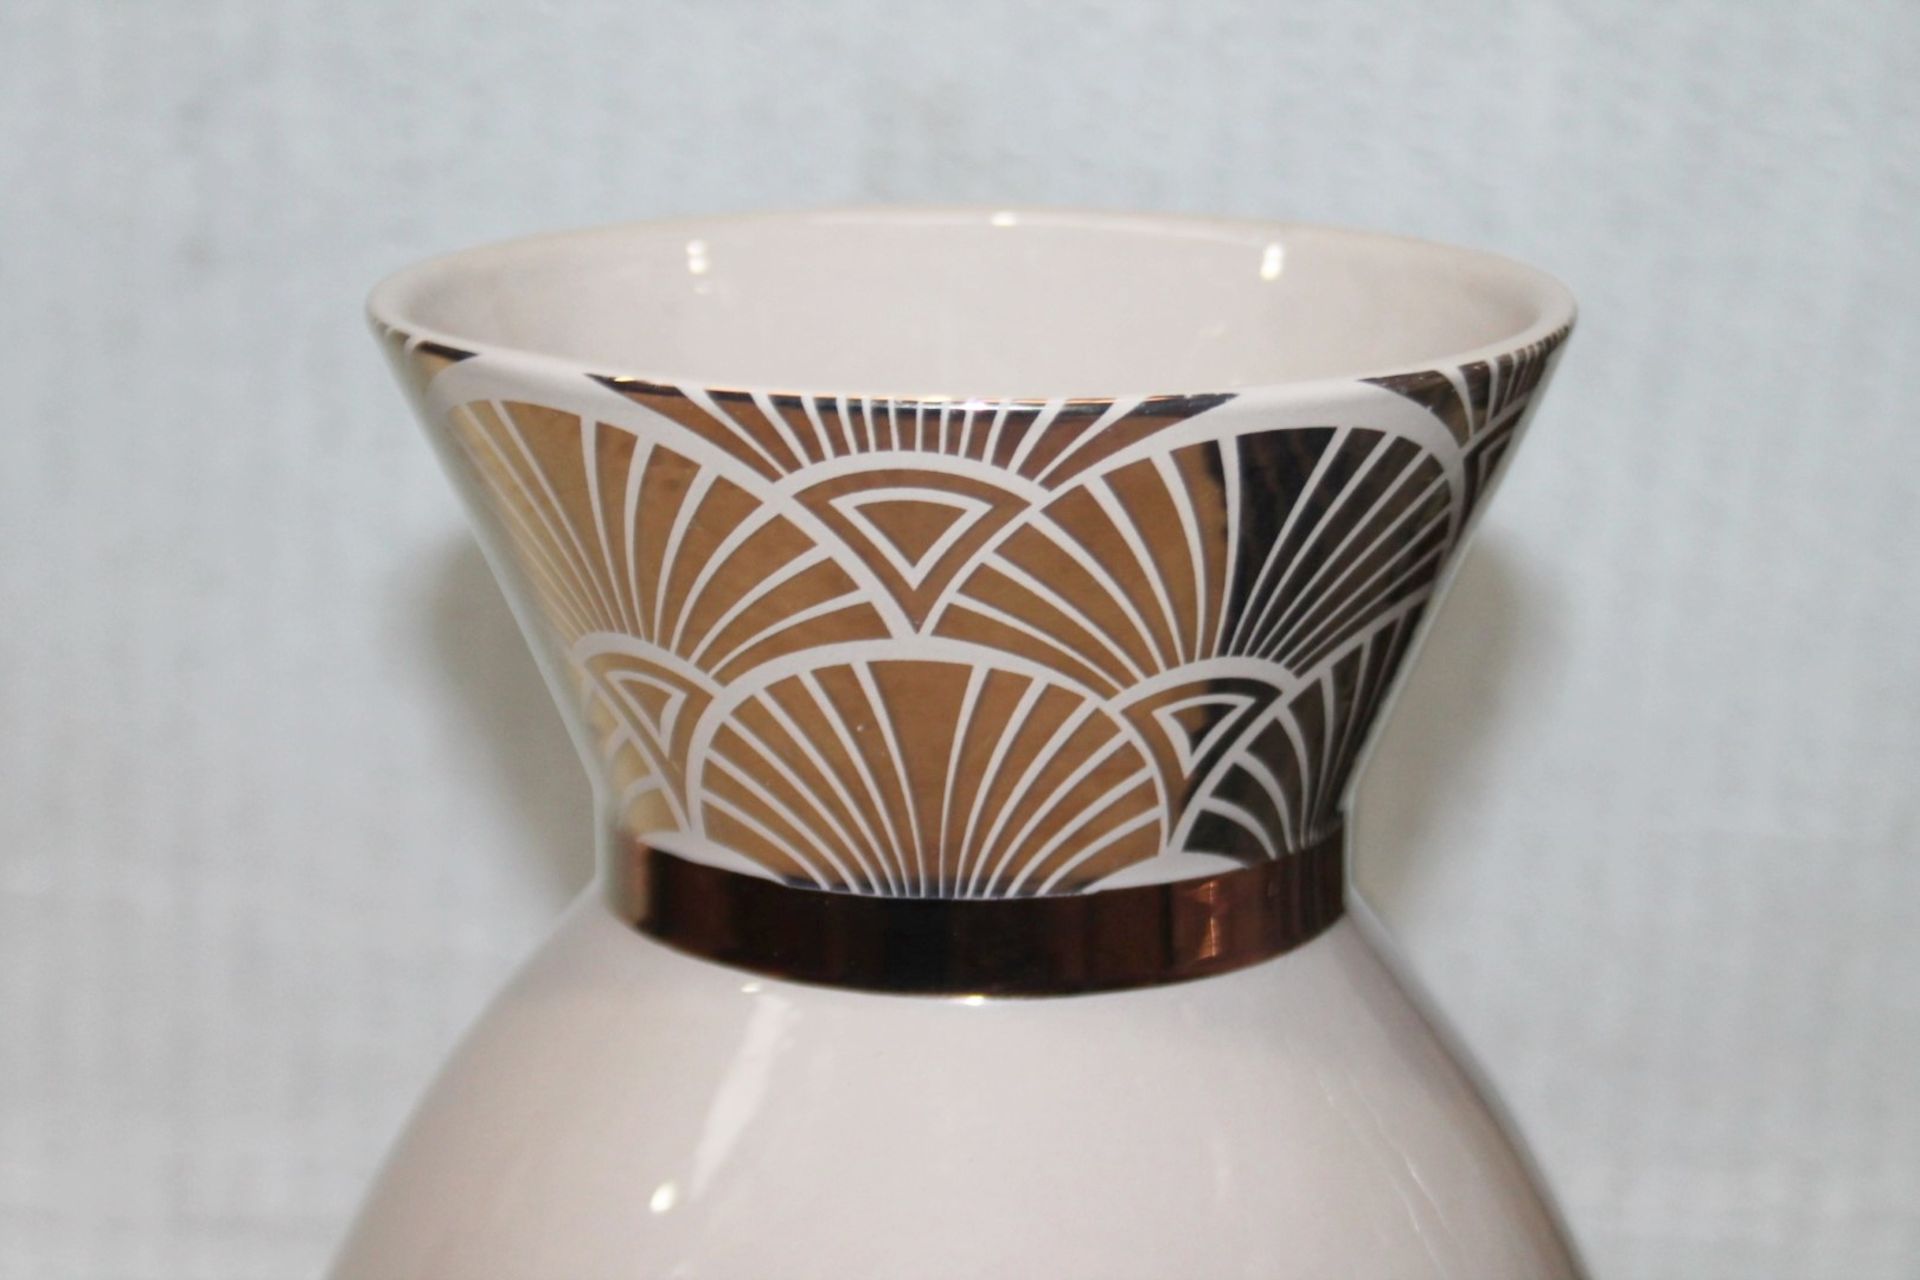 1 x VISIONNAIRE Large Luxury Vase Featuring An Art Deco Aesthetic And Gold Detailing - Ref: - Image 4 of 5